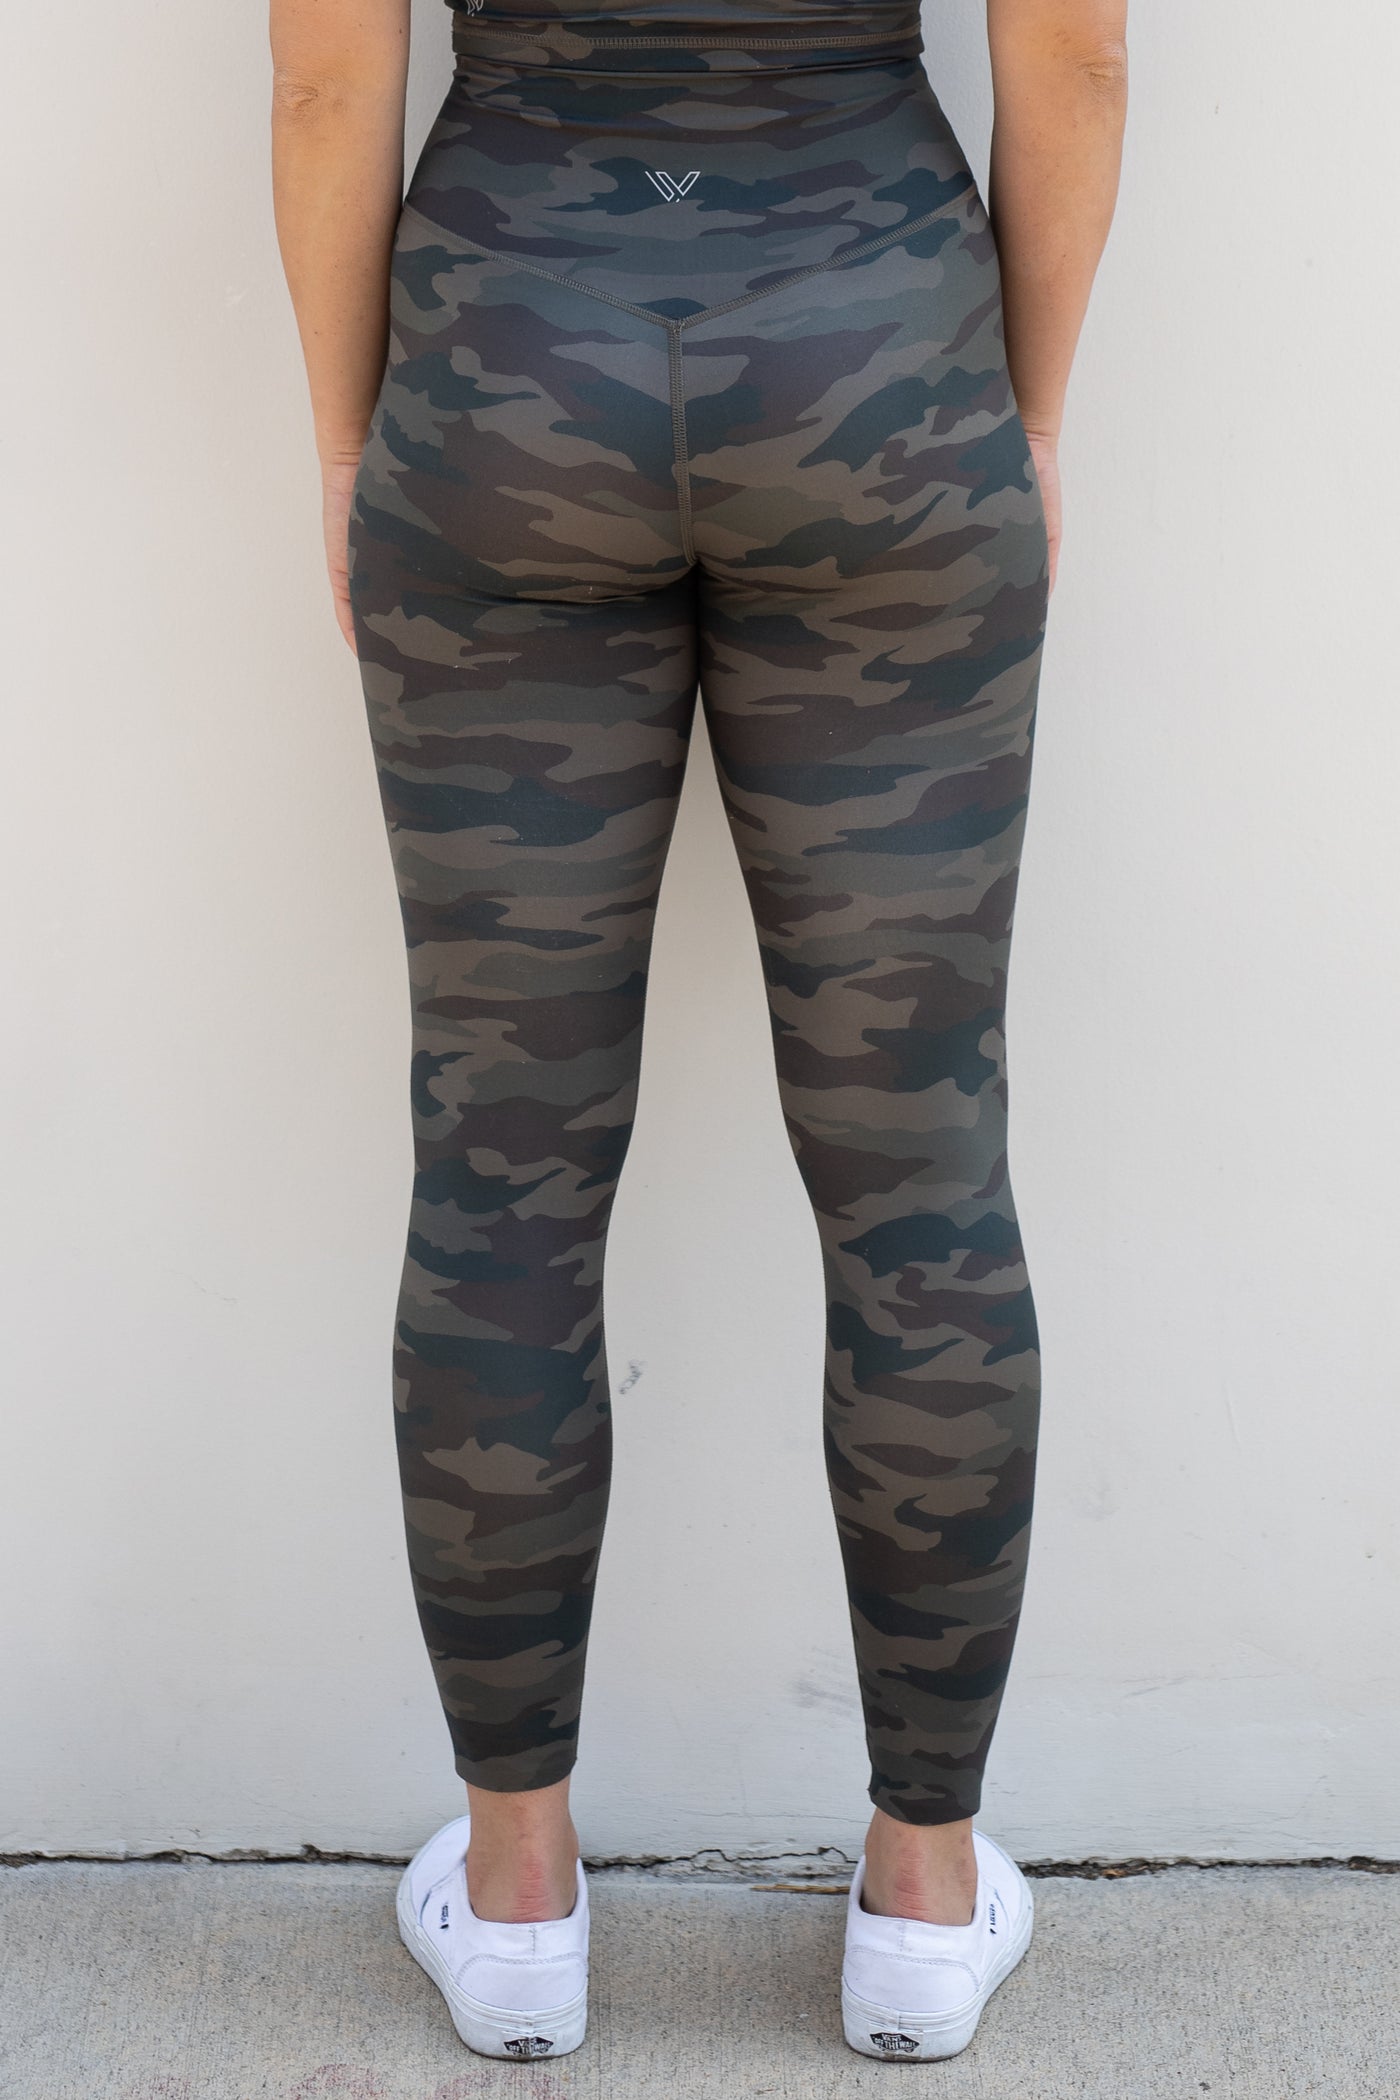 The Best Camo Leggings You Can Buy on